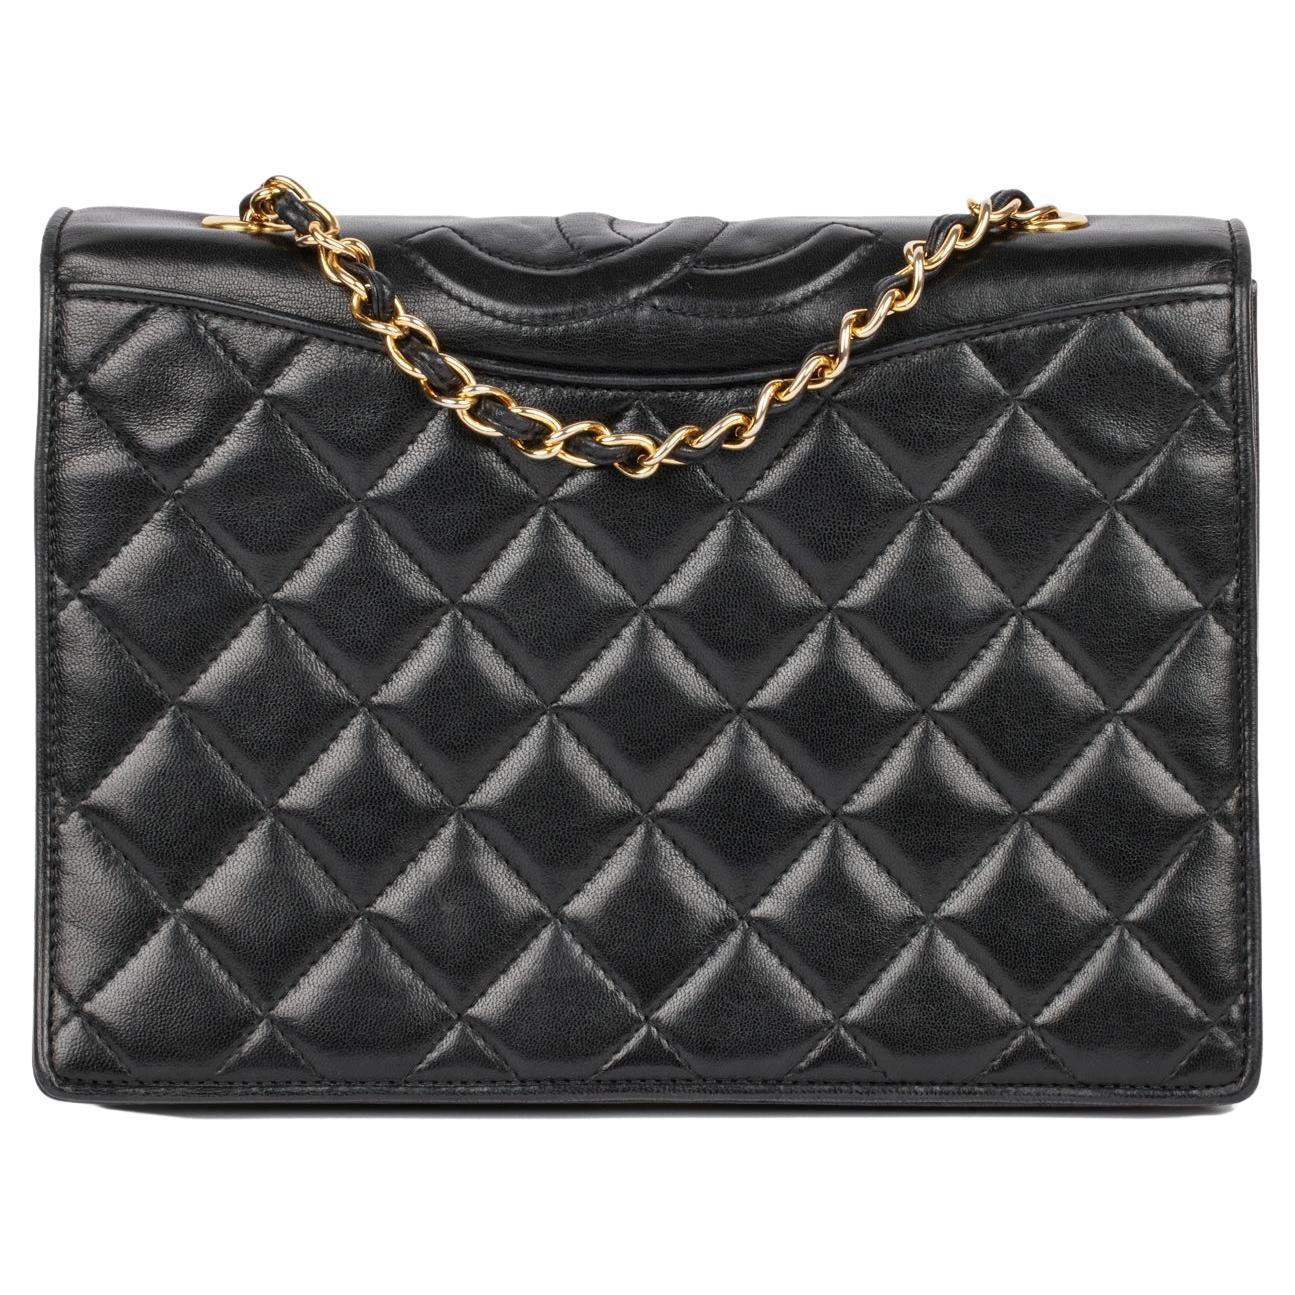 Chanel Black Quilted Lambskin Vintage Small Timeless Single Flap Bag